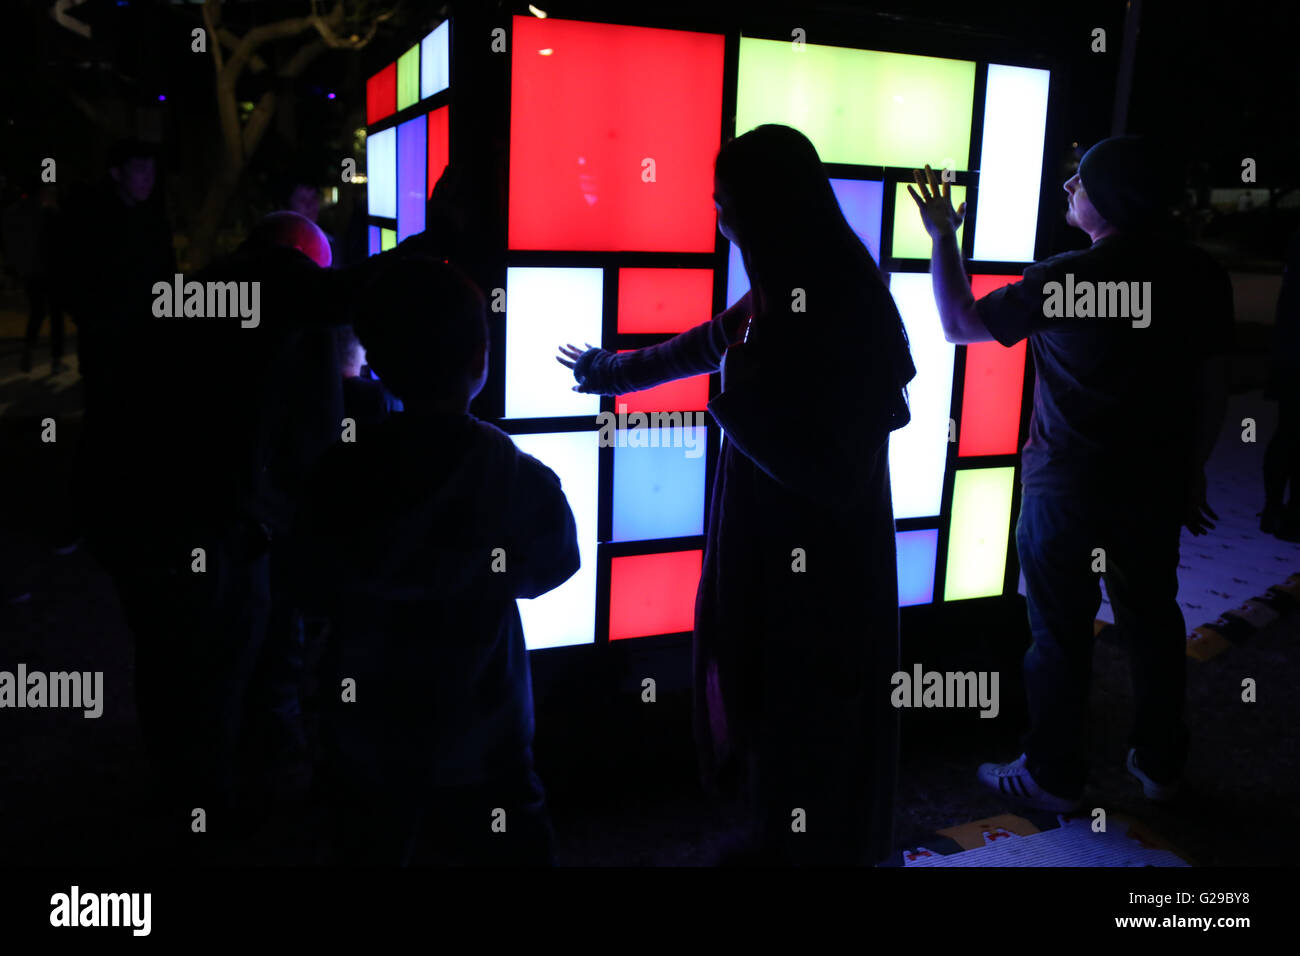 Sydney, Australia. 26 May 2016. Vivid Sydney, the world’s largest festival of light, music and ideas runs for 23 nights from 27 May-18 June 2016. Pictured: Mondrian Cube (AUS): Mondrian Cube reinterprets the abstract artwork of Dutch painter, Piet Mondrian, into a dynamic, interactive installation that enables users to change core visual elements into their own masterpieces of pattern, colour and balance. Credit:  Richard Milnes/Alamy Live News Stock Photo